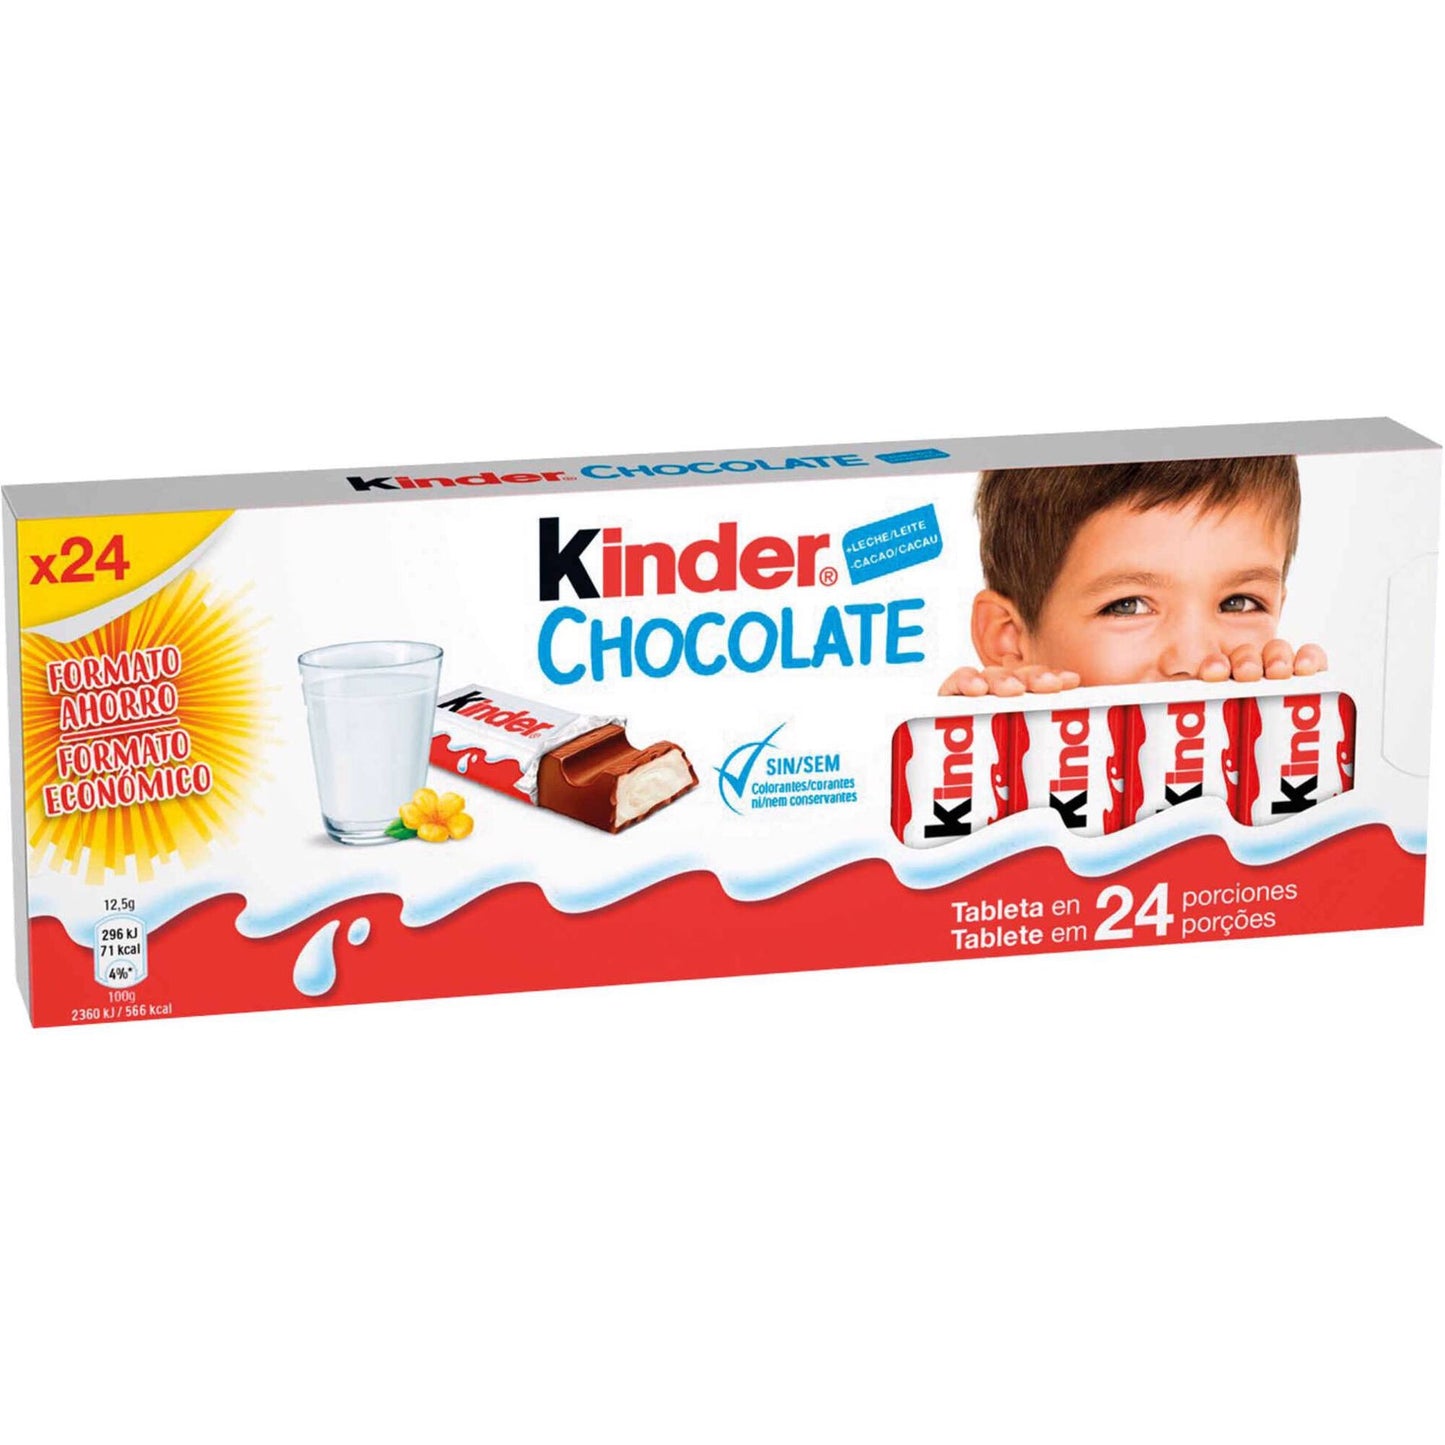 Snack Chocolate con Leche Kinder 24 x 12,5 gr